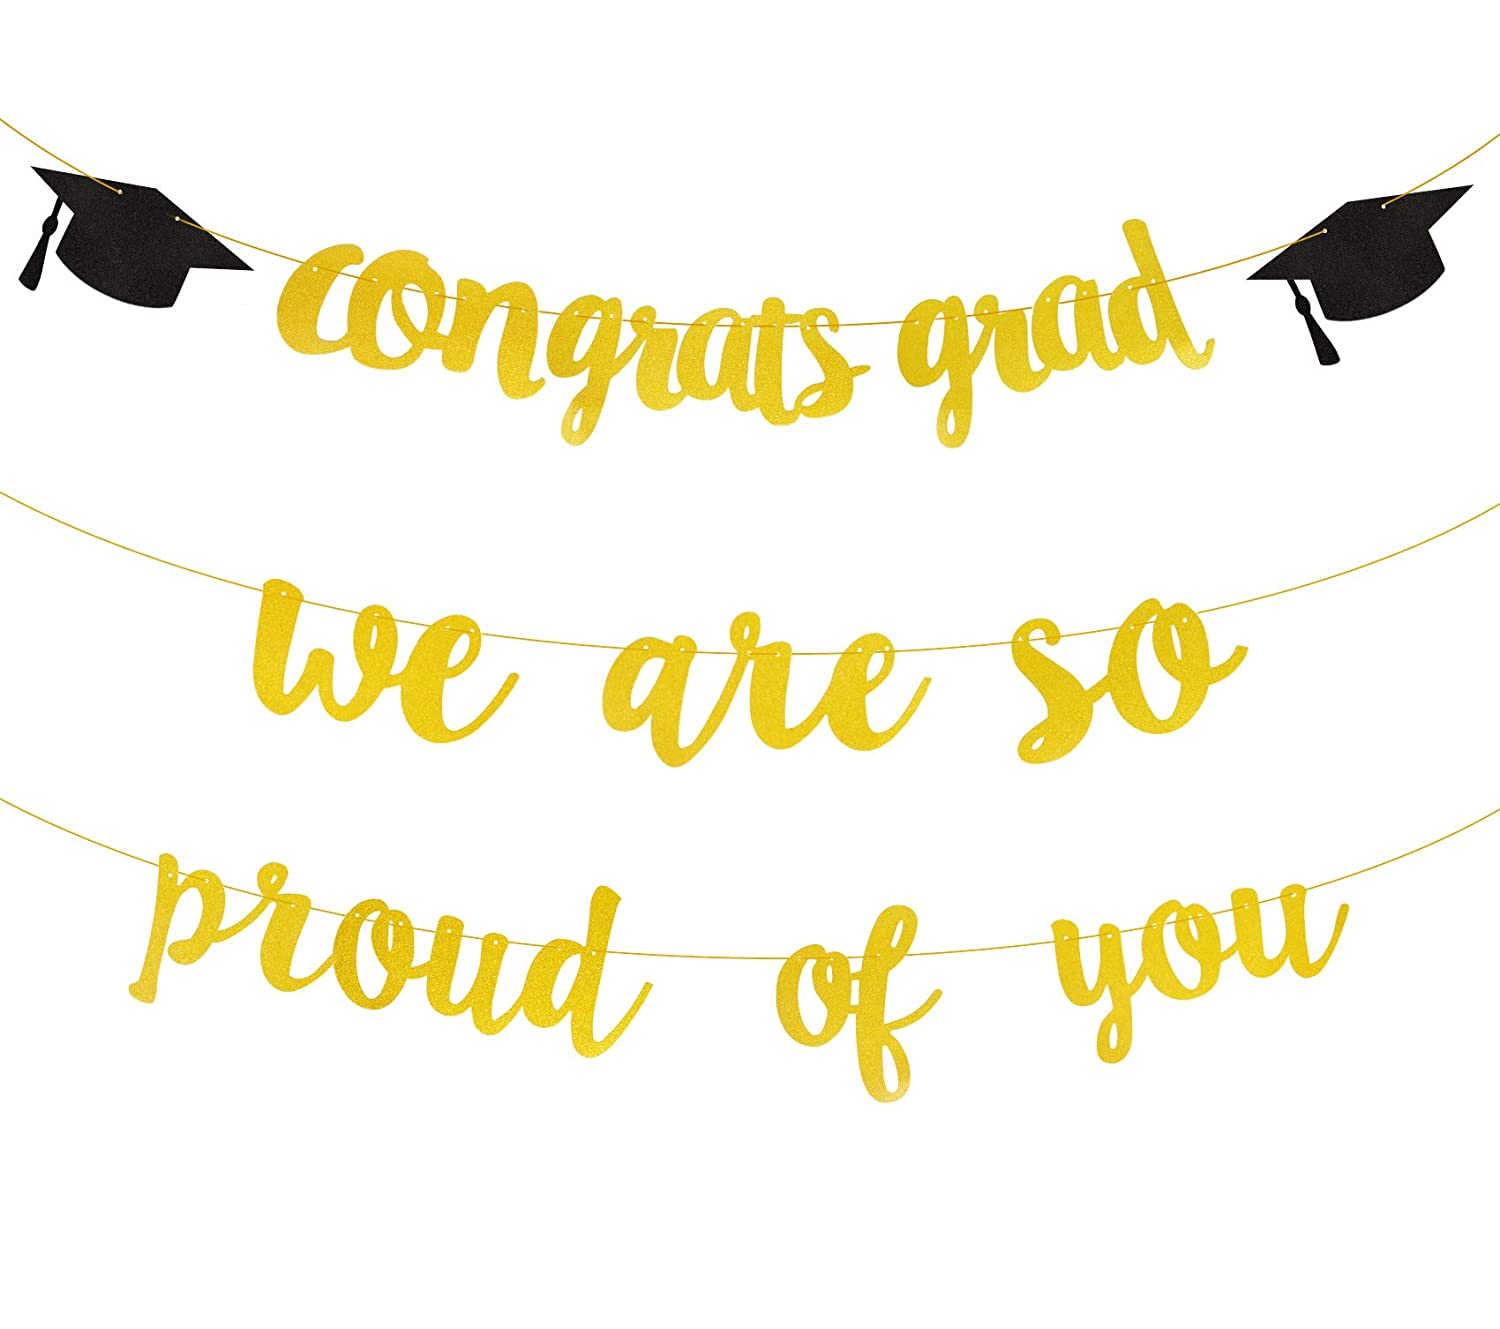 MOTZU 5 Pack Graduation Banners Congrats Grad Finally Done Signs Gold Glitter We Are So Proud of You Banner Congratulation Happy Graduation Party Hanging Decorations 